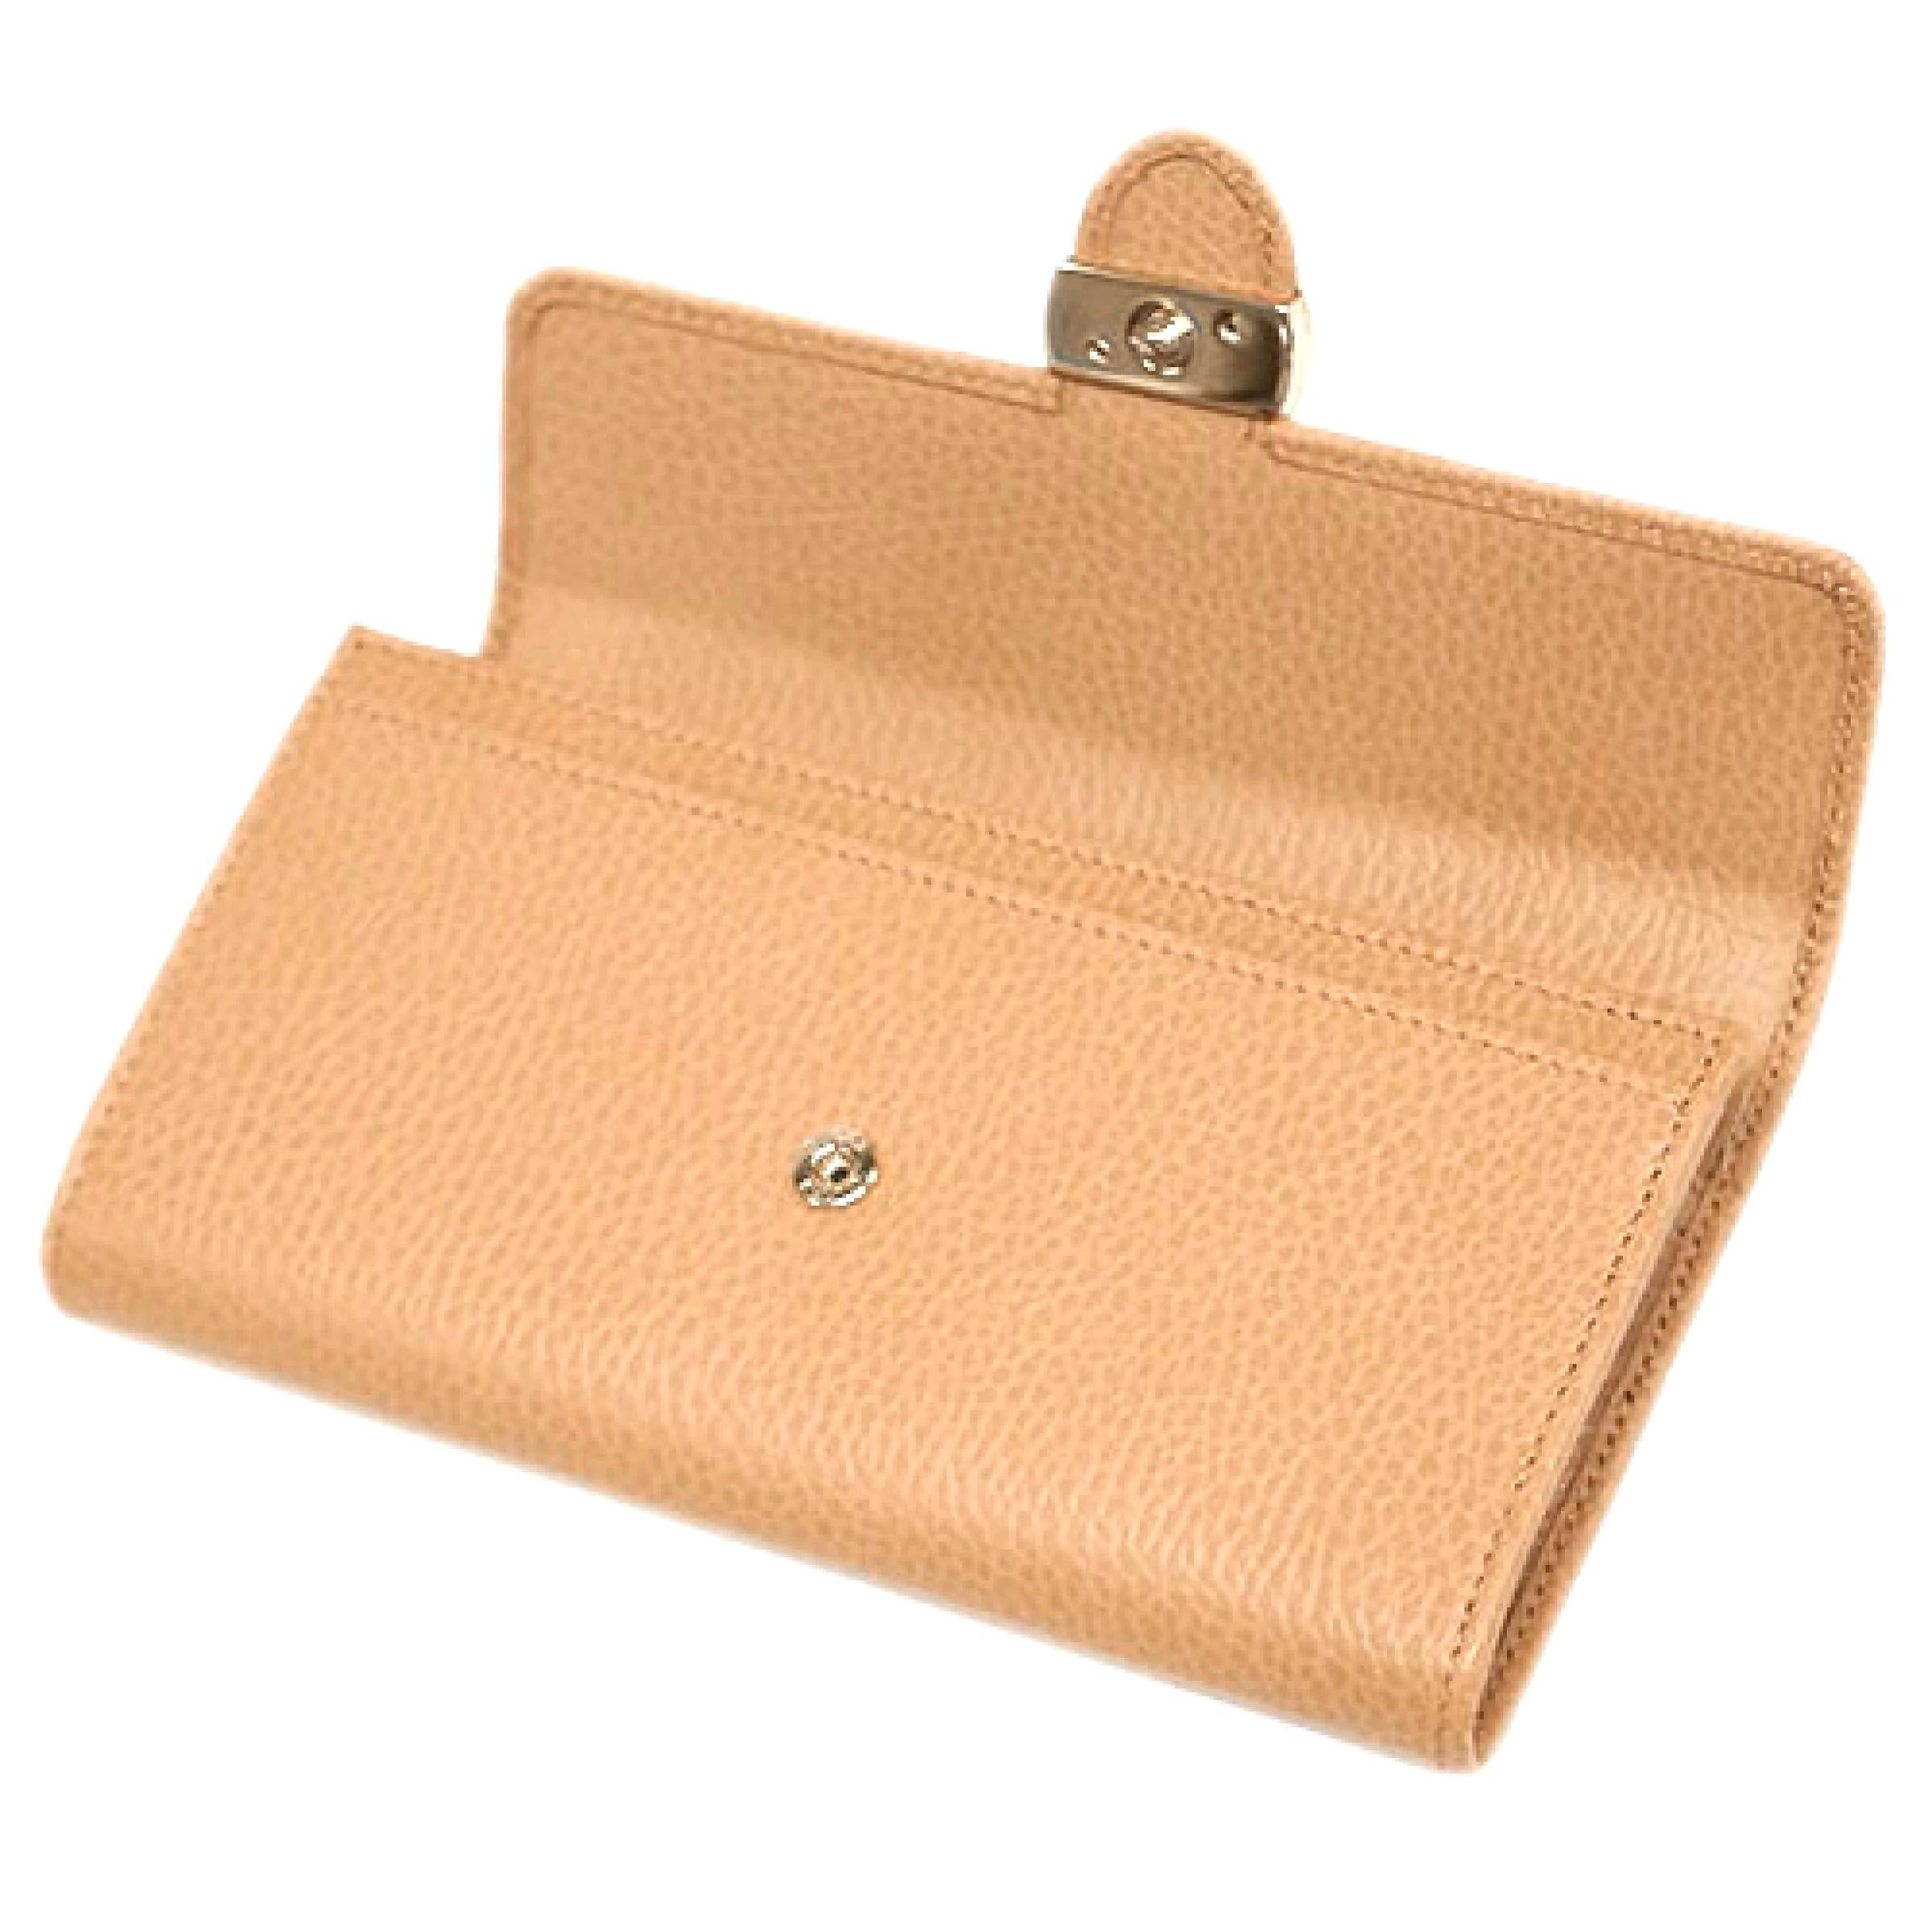 NEW Gucci Beige Interlocking G Leather Long Wallet Clutch Bag For Sale 2